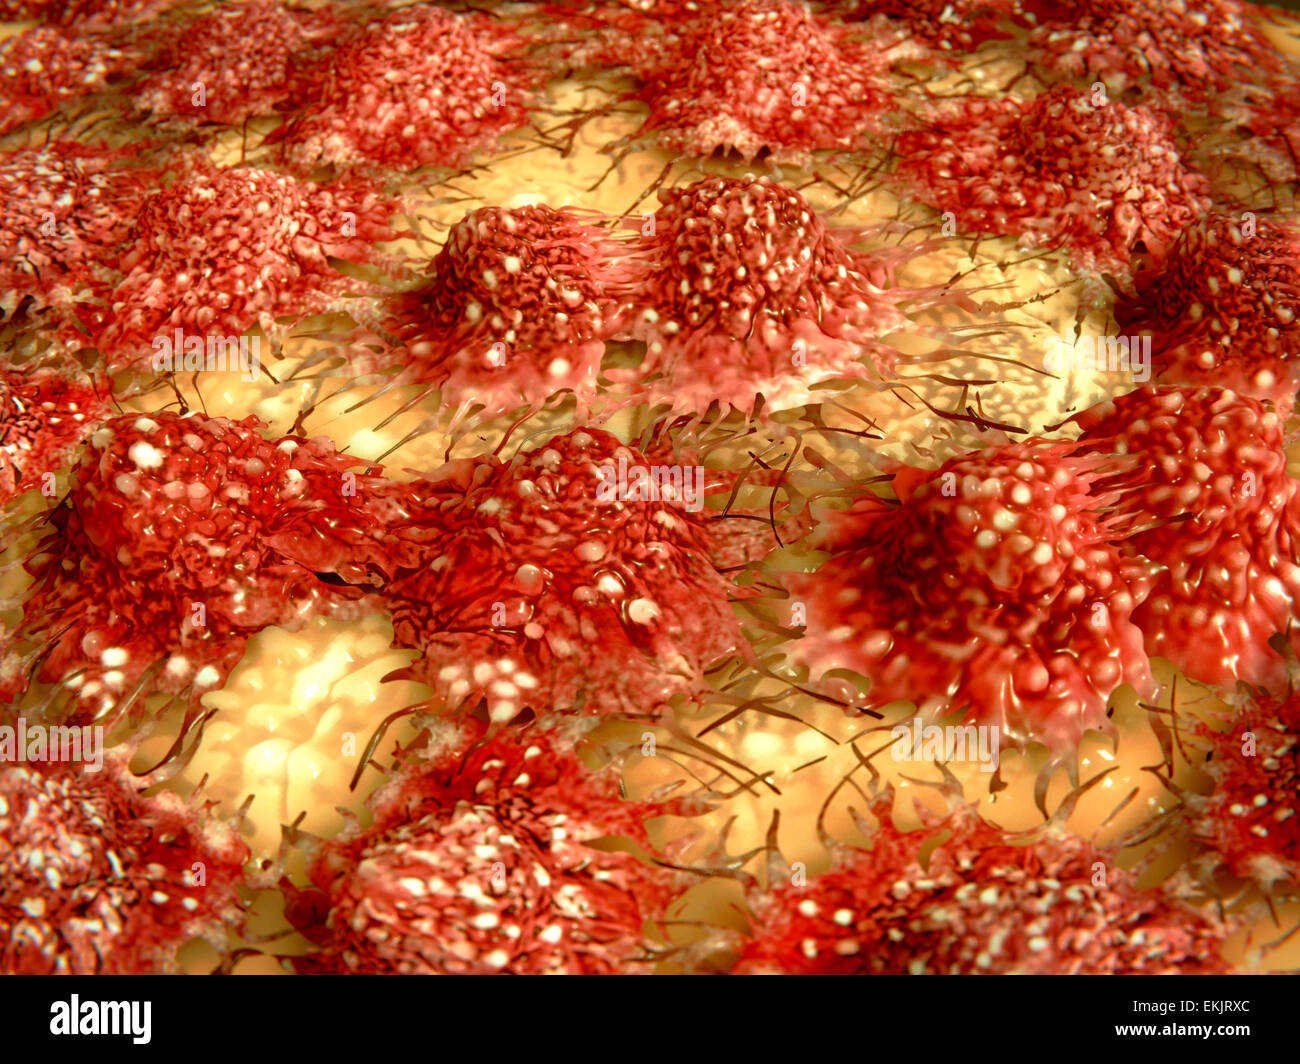 artwork, biomedical illustration, cancer, cancer cell, cancerous, cell division, cells, disease, dividing, division, growth, healthcare, illustration, malignant, medical, mitosis, oncology, proliferation, tissue, tumor, Stock Photo